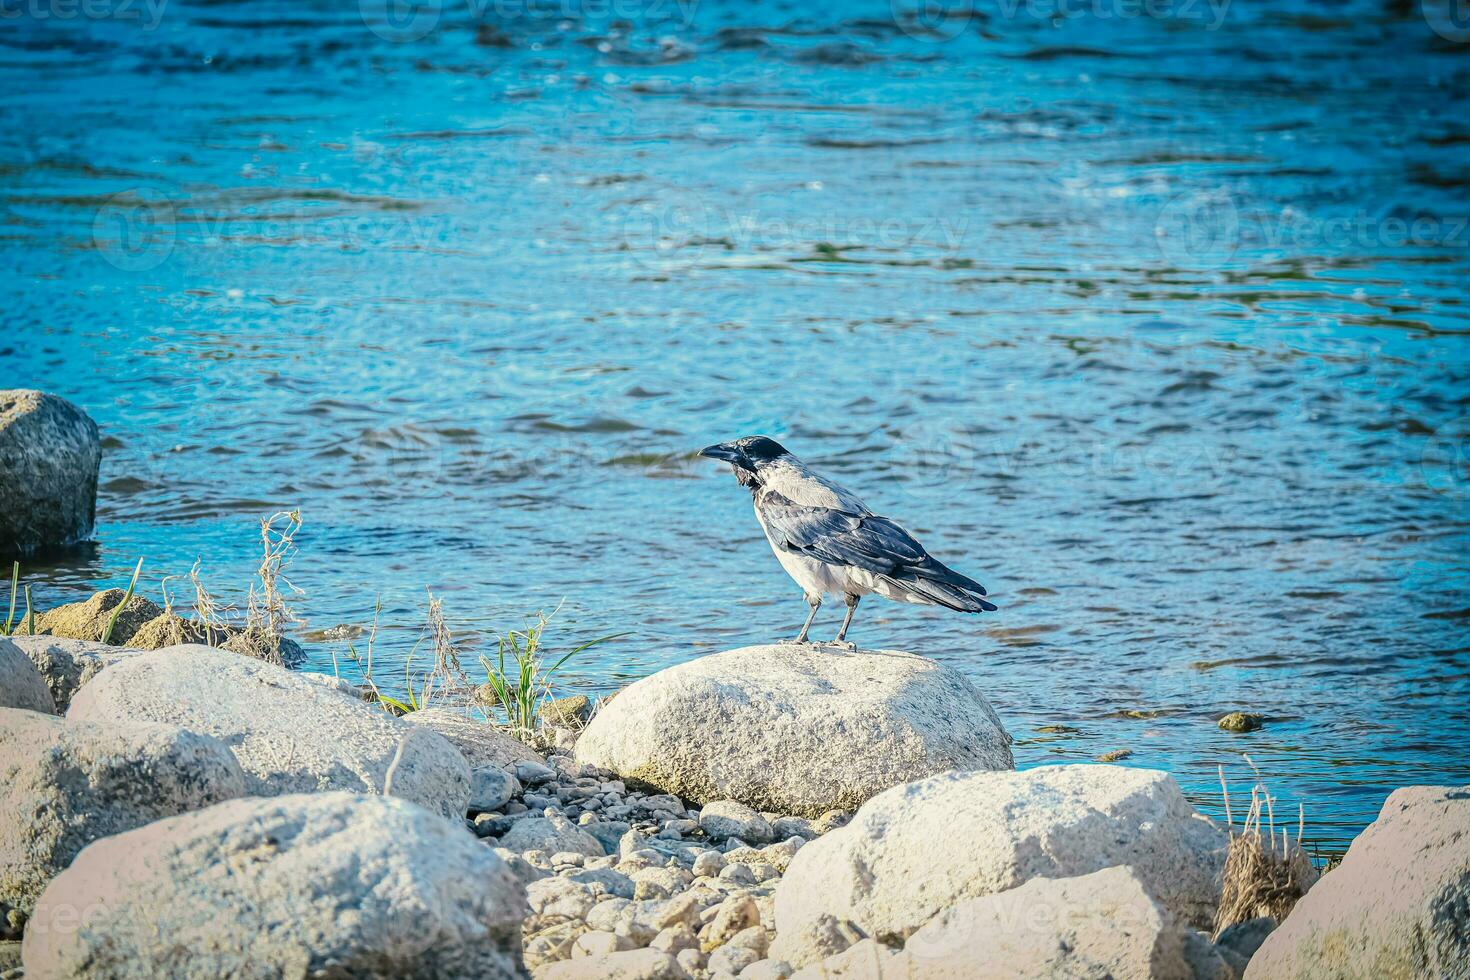 Big crow with black tail sitting on dry rocks near the blue river water photo